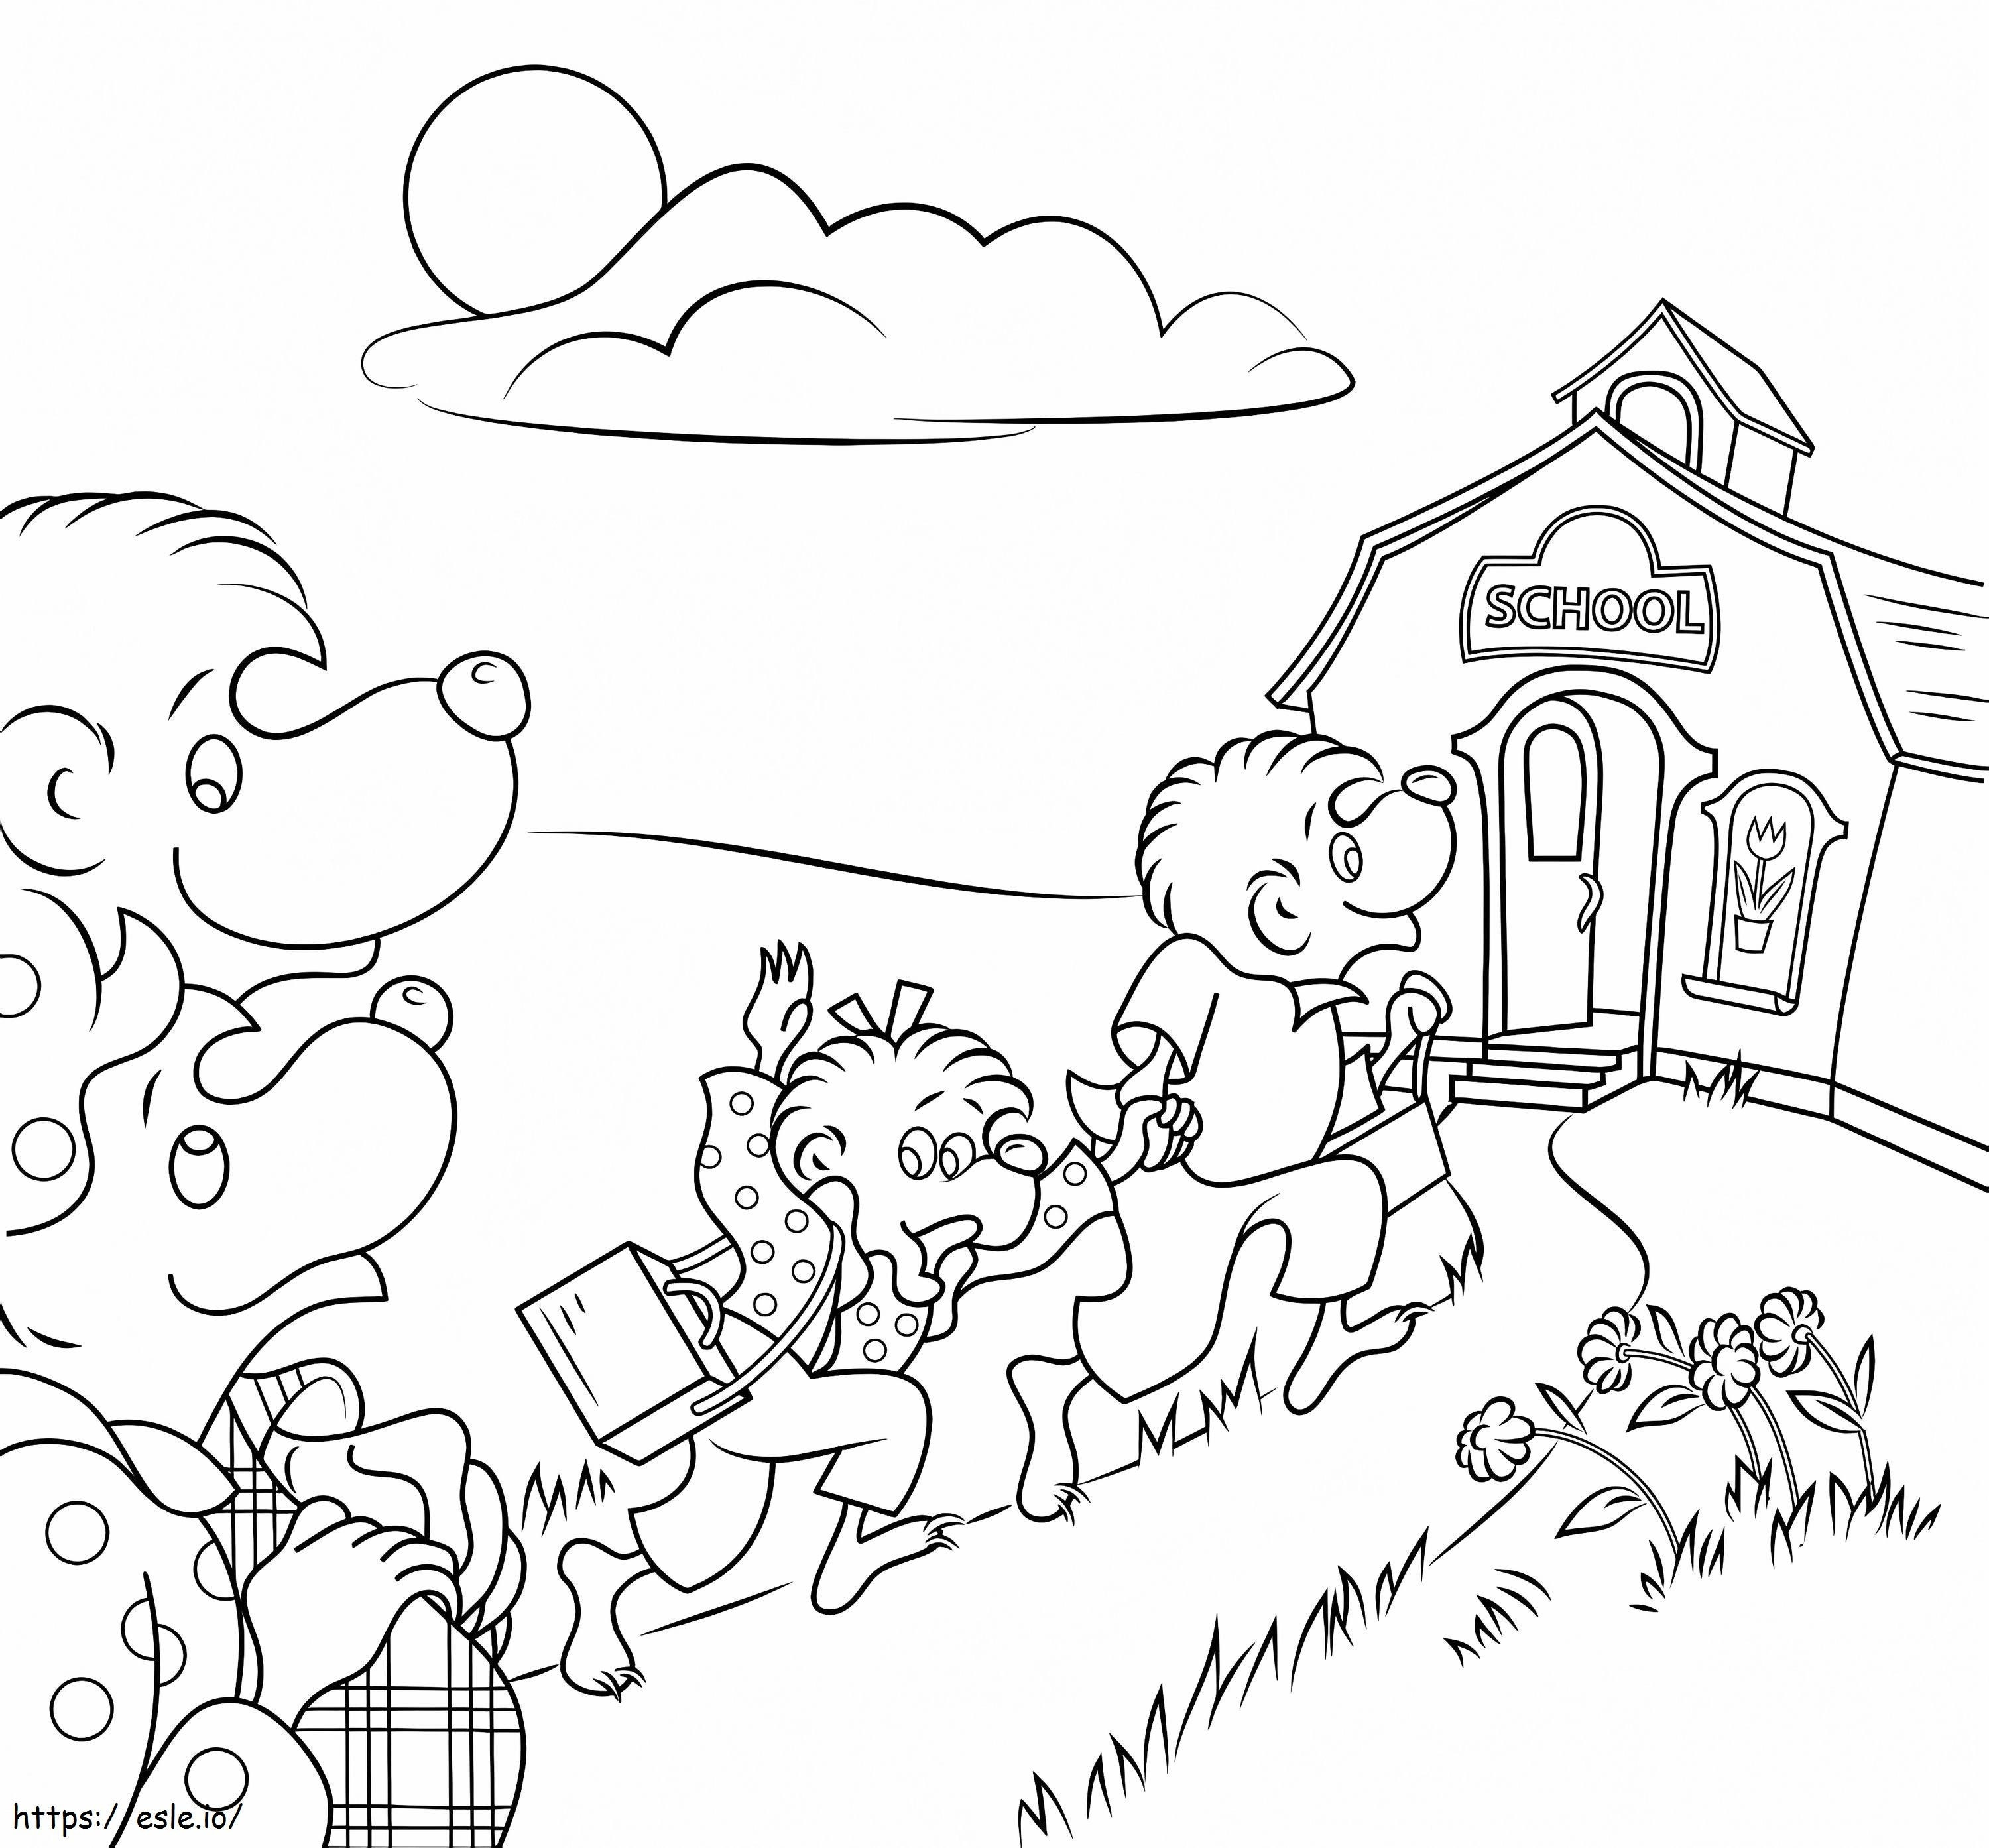 Berenstain Bears Go To School coloring page